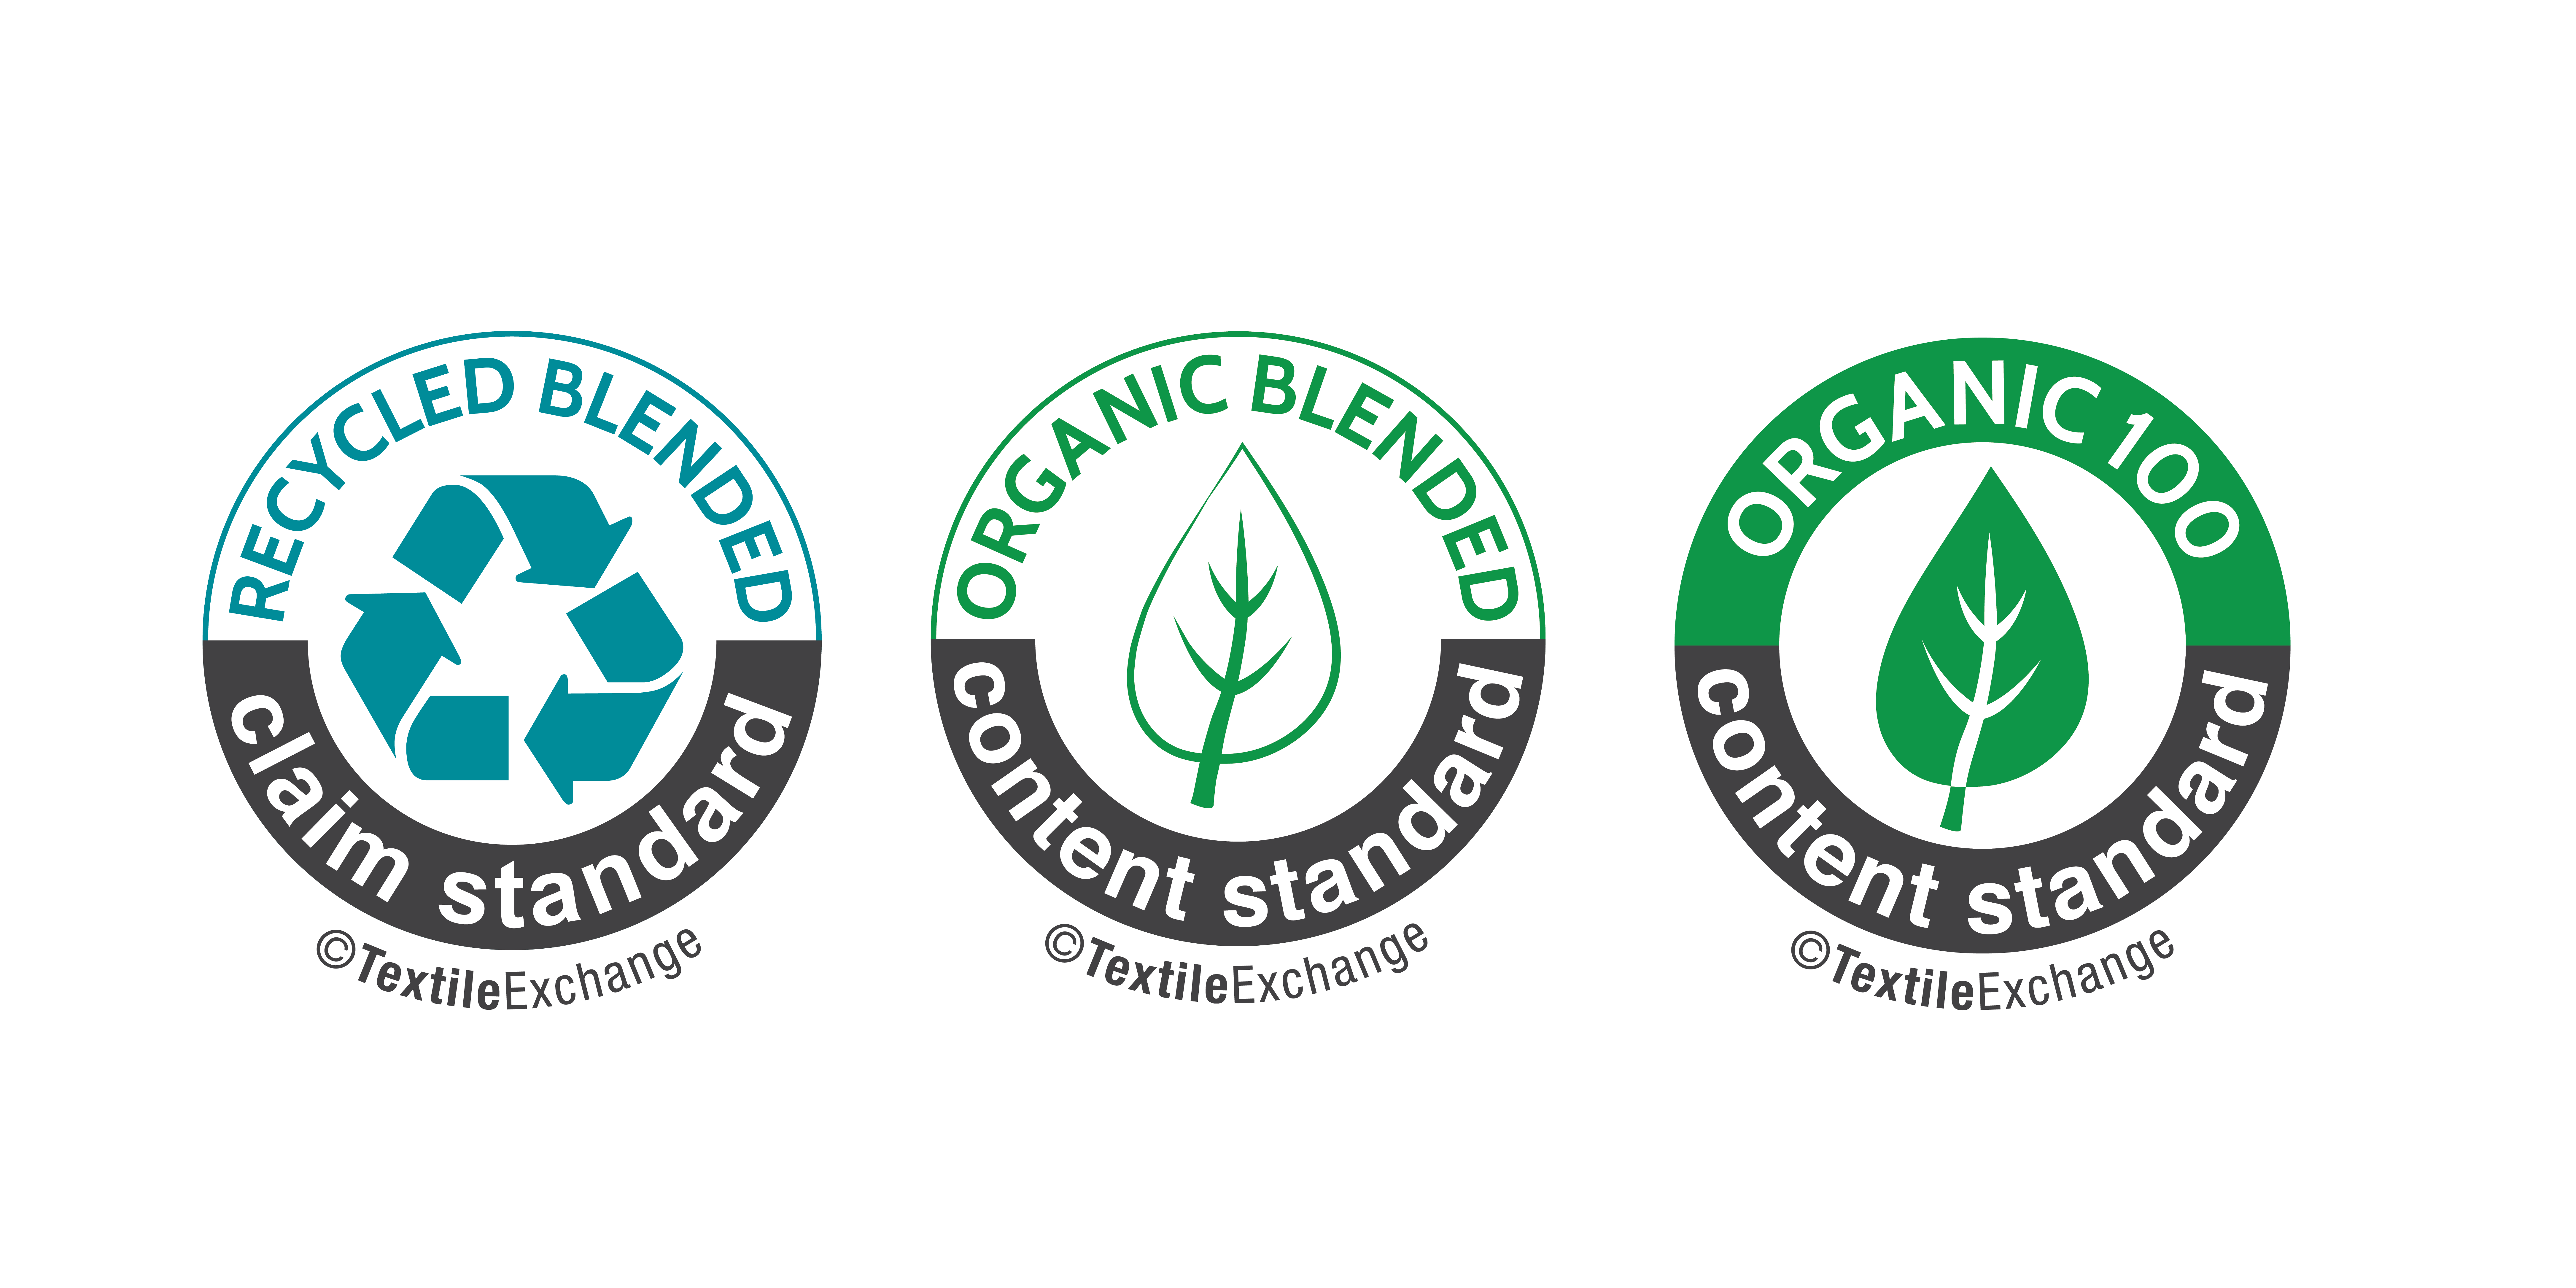 Cone Denim is certified to the Organic Content Standard (OCS) and Recycled Claim Standard (RCS), from Textile Exchange